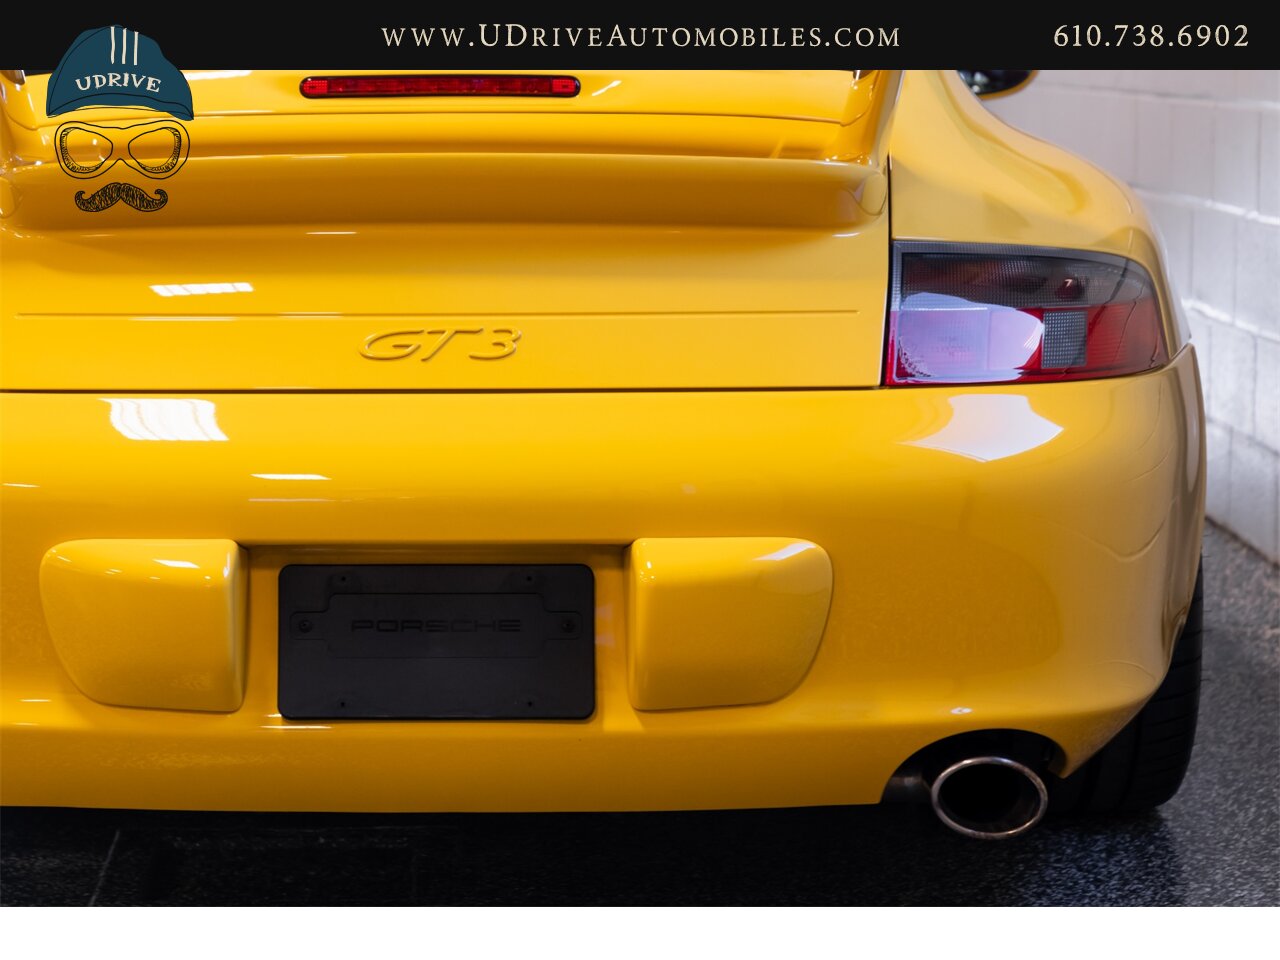 2005 Porsche 911 GT3 996 Speed Yellow Sport Seats Pntd Hardbacks  Pntd Console Deviating Stitch Yellow Accents Throughout - Photo 23 - West Chester, PA 19382